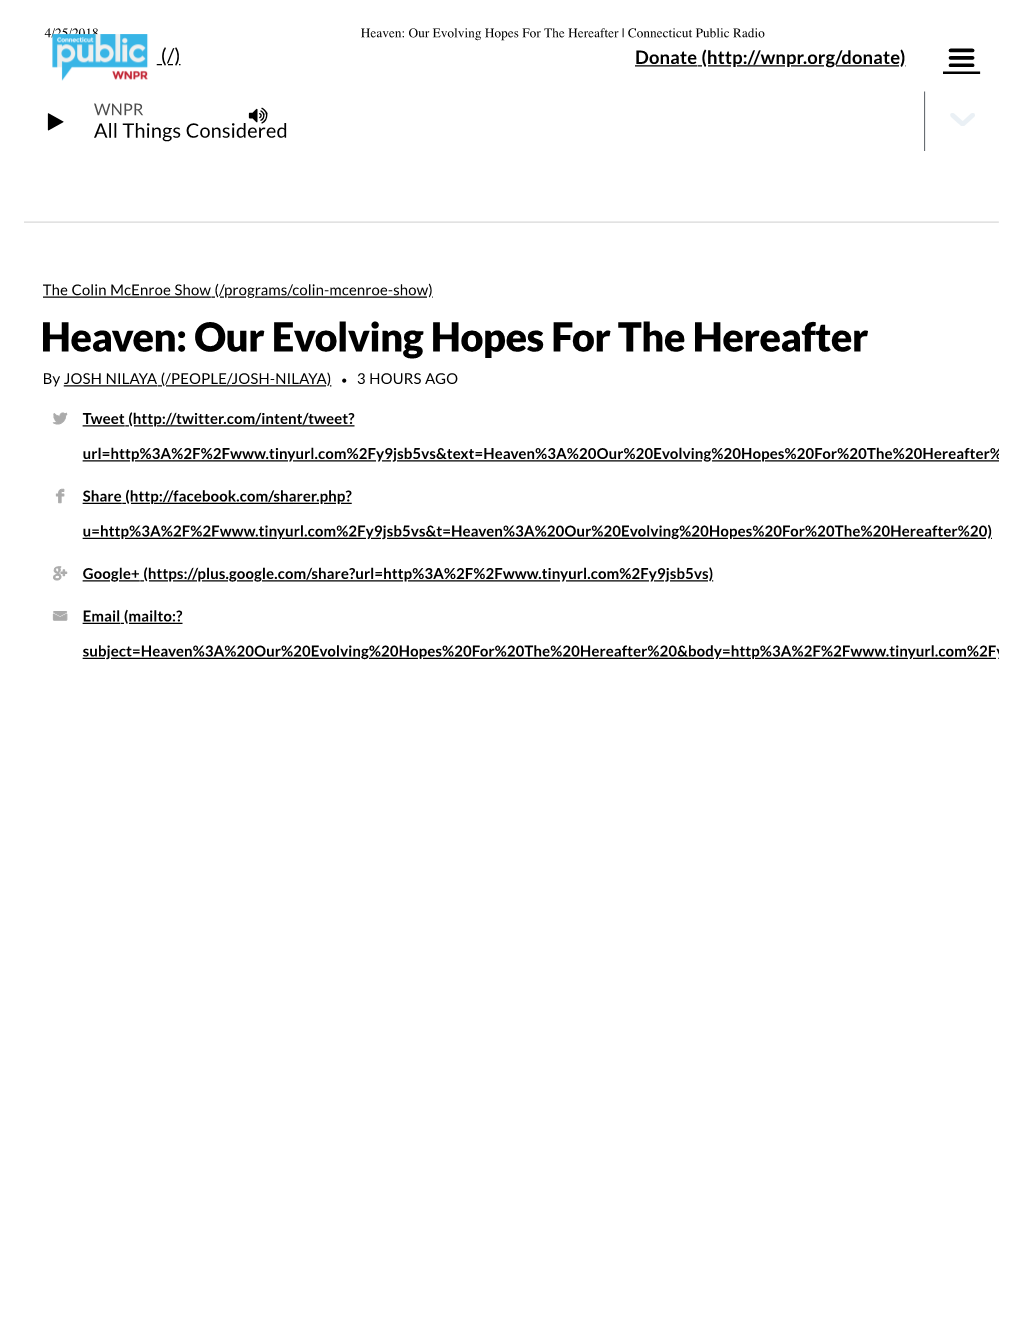 Our Evolving Hopes for the Hereafter | Connecticut Public Radio (/) Donate ( 